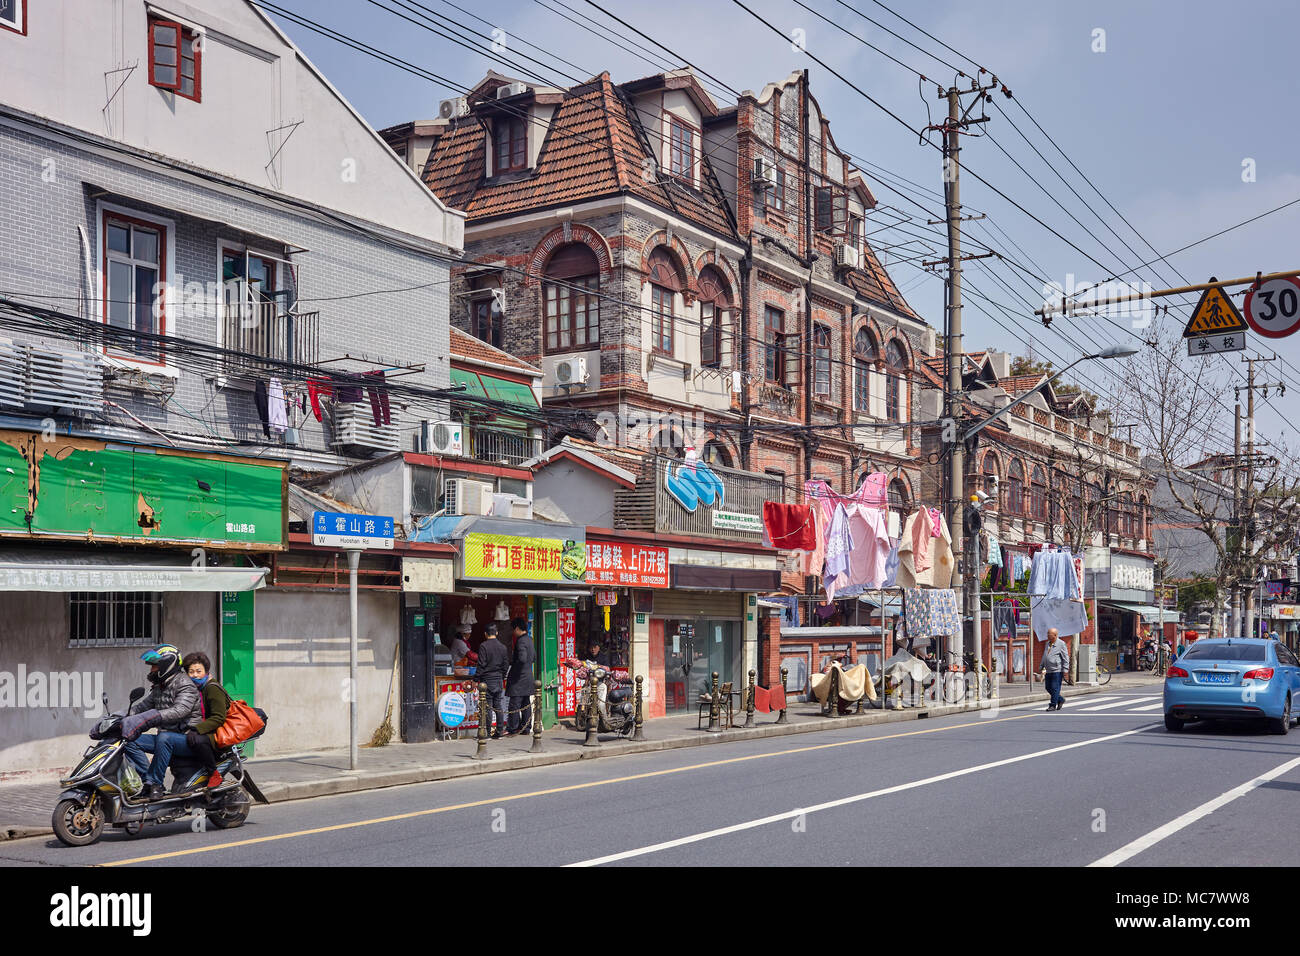 The Shanghai Ghetto, formally known as the Restricted Sector for Stateless Refugees, was an area of approximately one square mile in the Hongkew distr Stock Photo